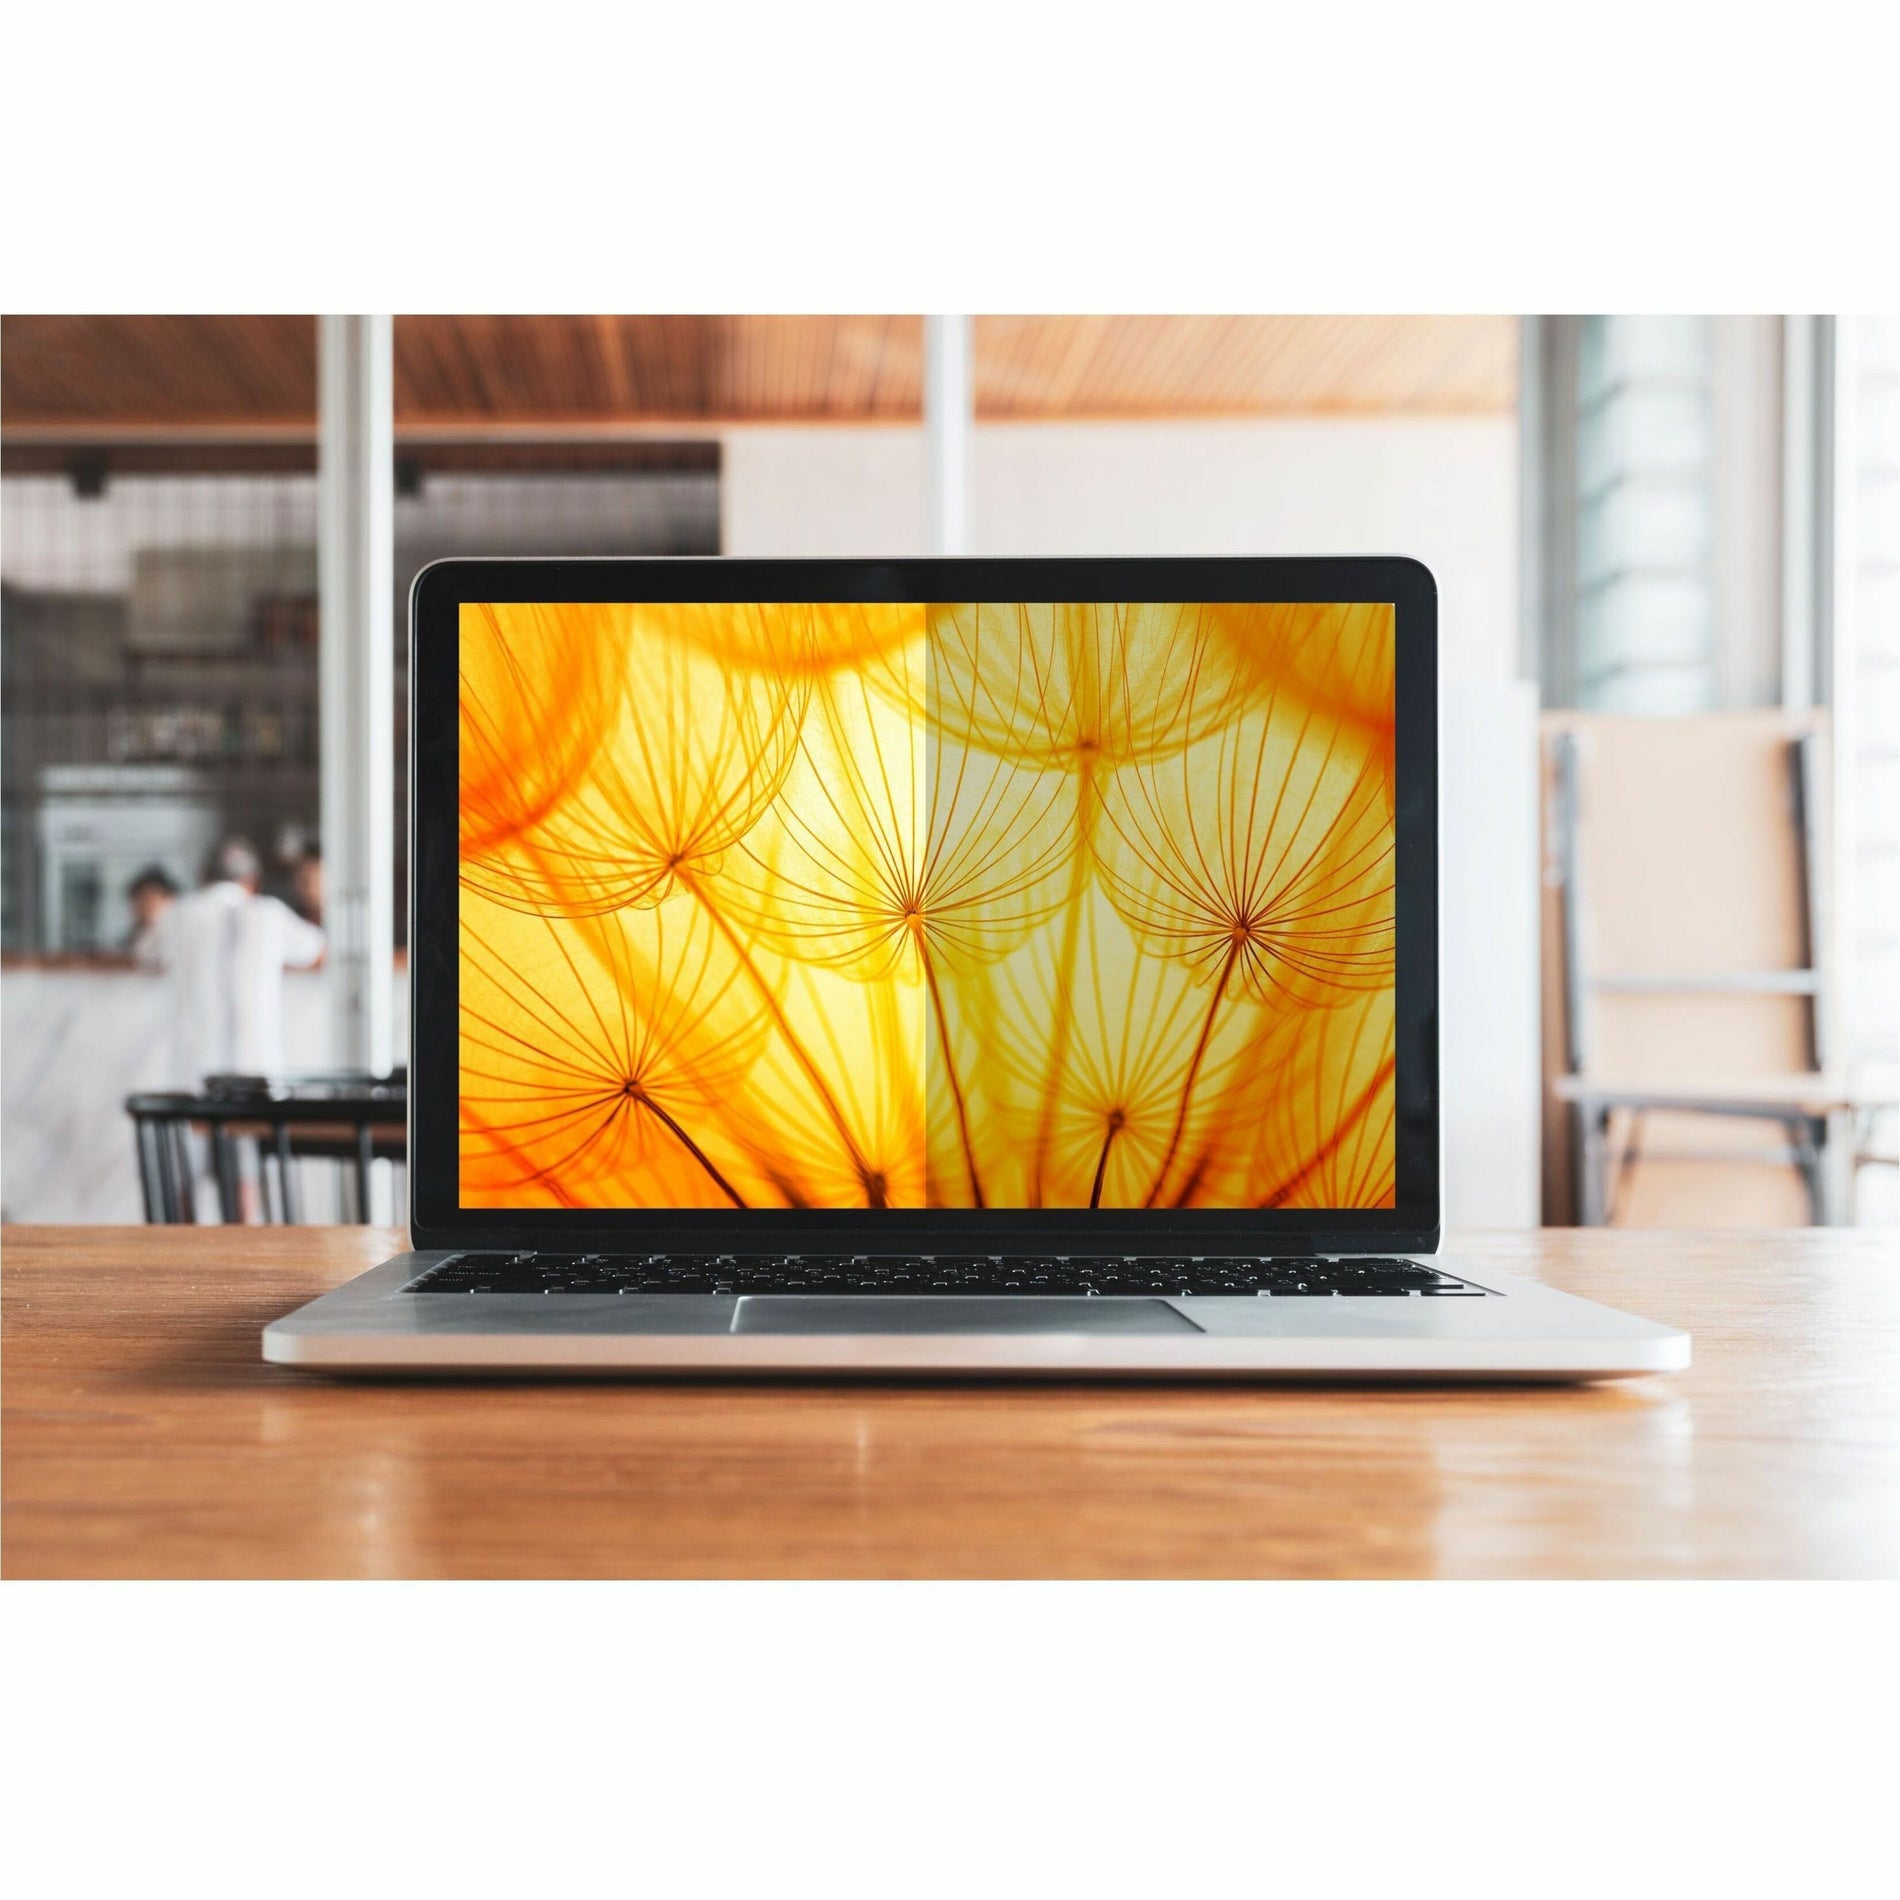 3M BP156W9B Bright Screen Privacy Filter for 15.6in Laptop, 16:9, Ultra Slim, Easy to Apply, Matte Black